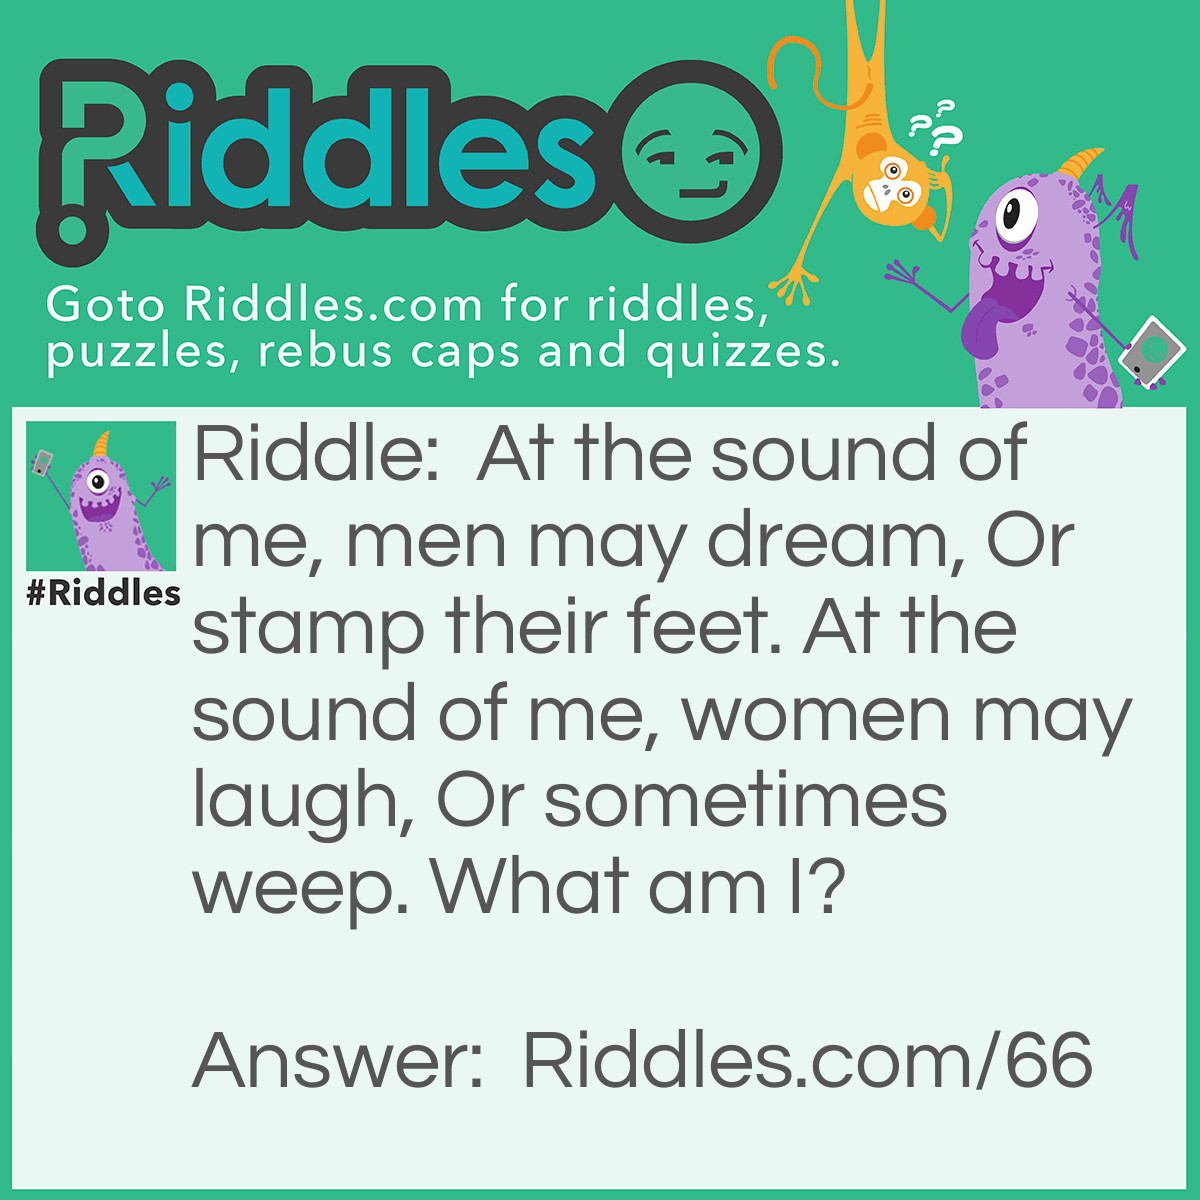 Riddle: At the sound of me, men may dream, Or stamp their feet. At the sound of me, women may laugh, Or sometimes weep. What am I? Answer: I am Music!